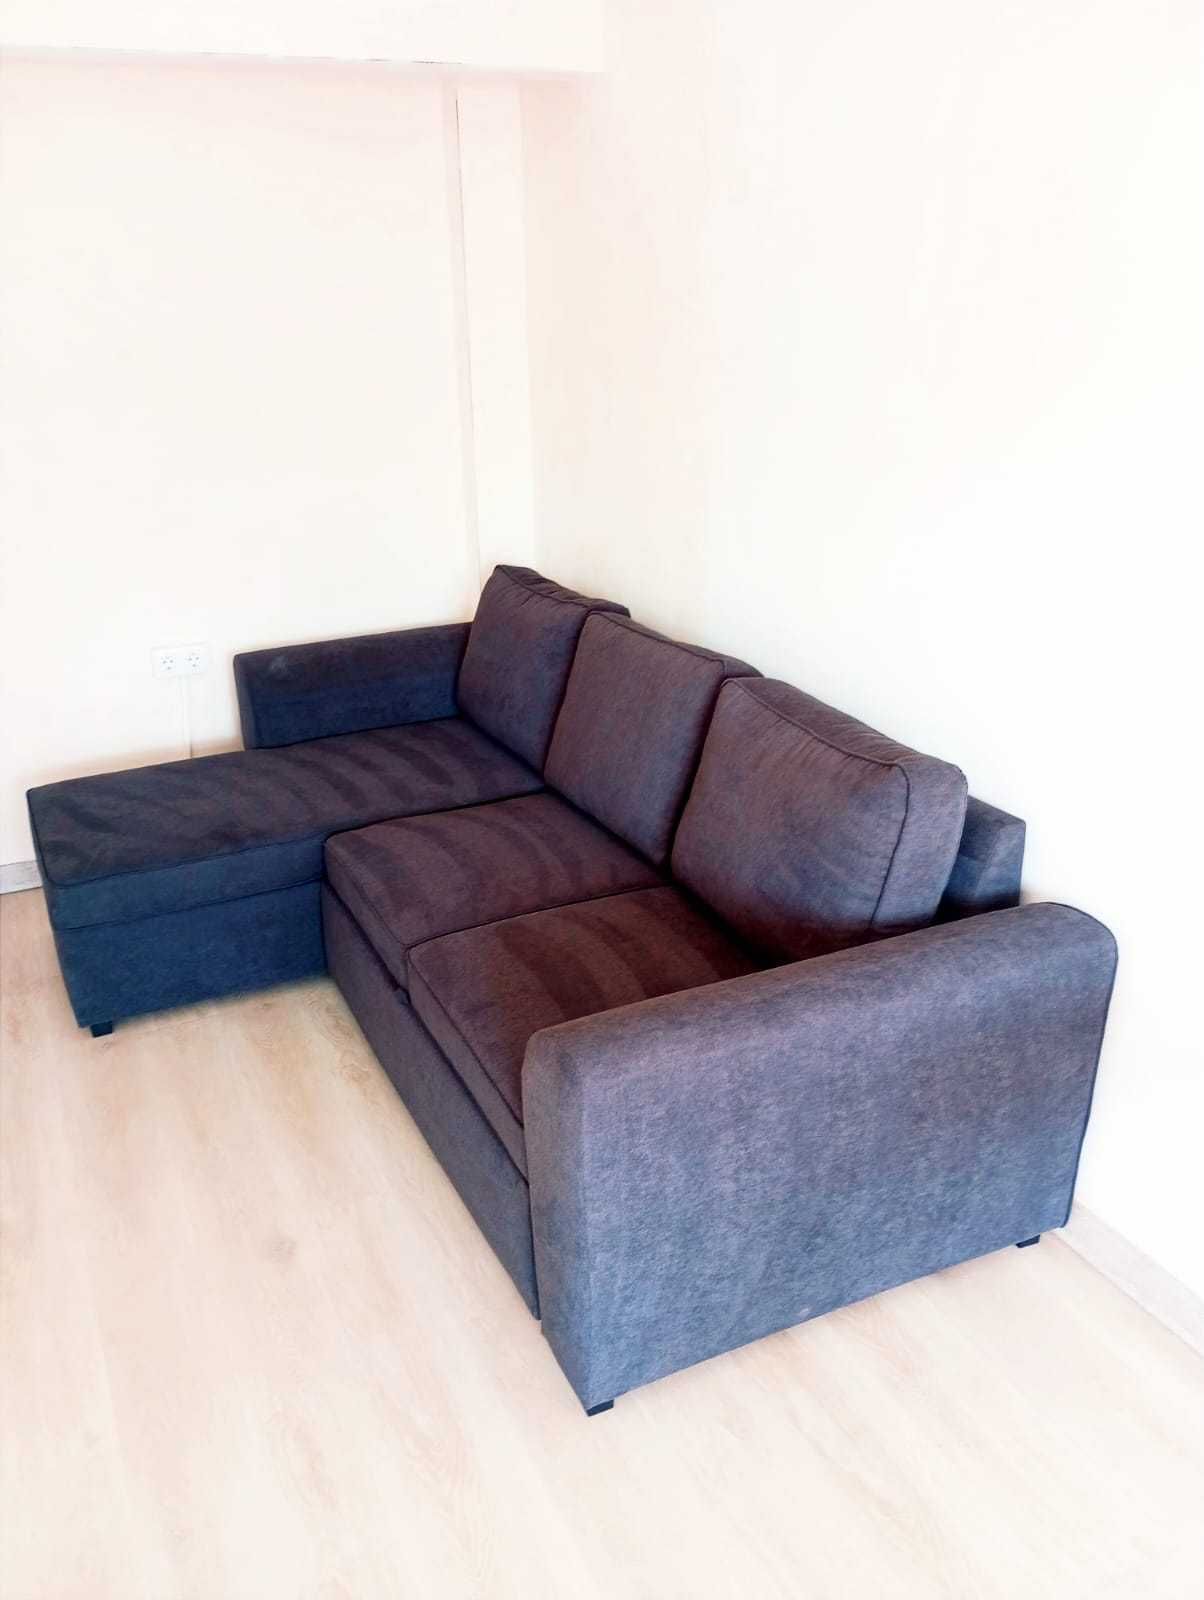 New unused immaculate Sofa with storage